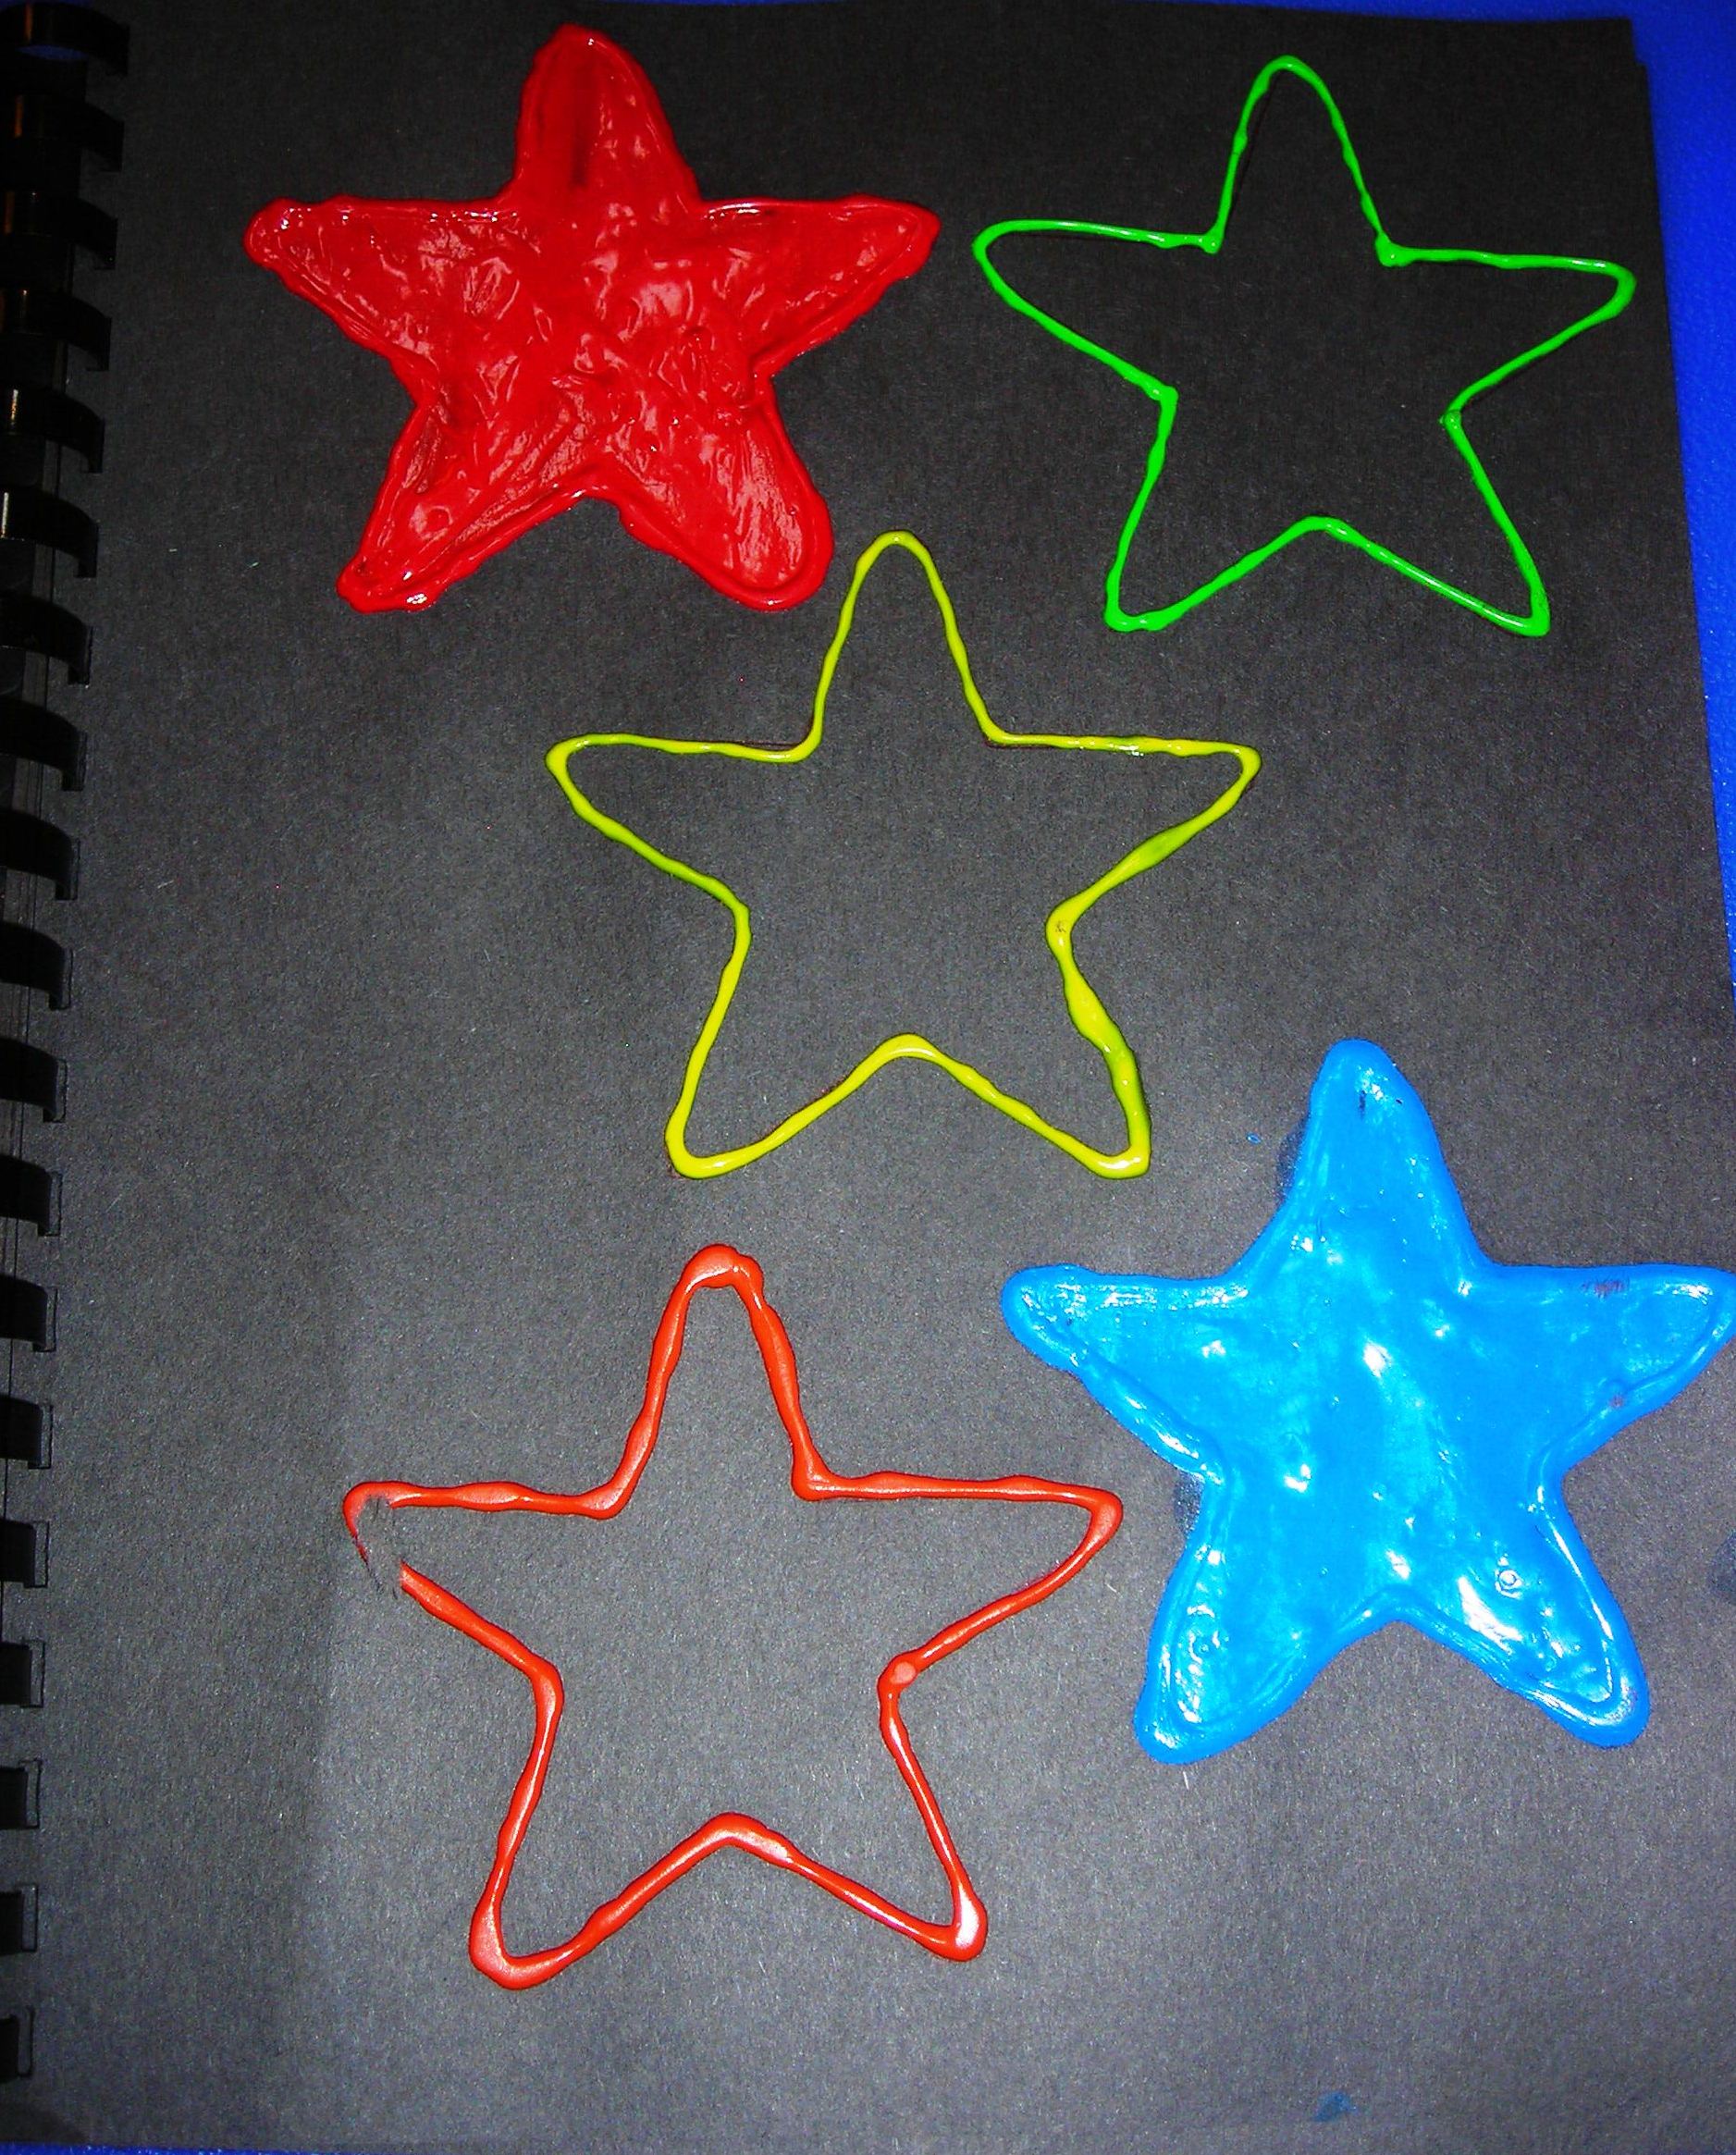 Colored stars on black background